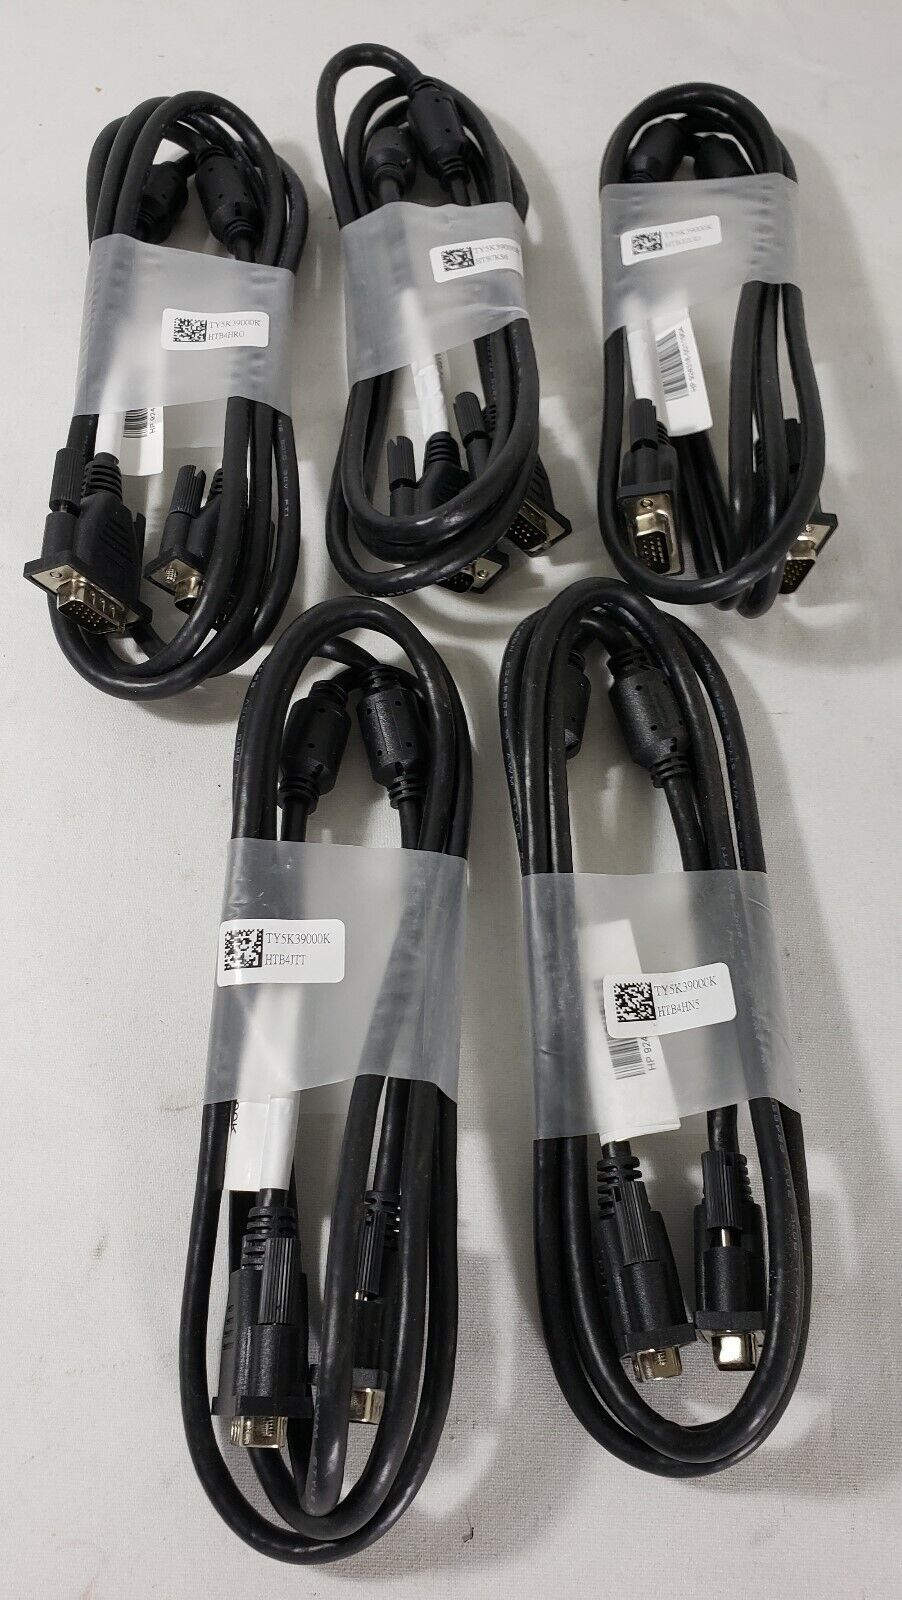 Lot of 5 Genuine HP 924318 Male To Male C2G VGA D-SUB Monitor Cable 15 P 6' New